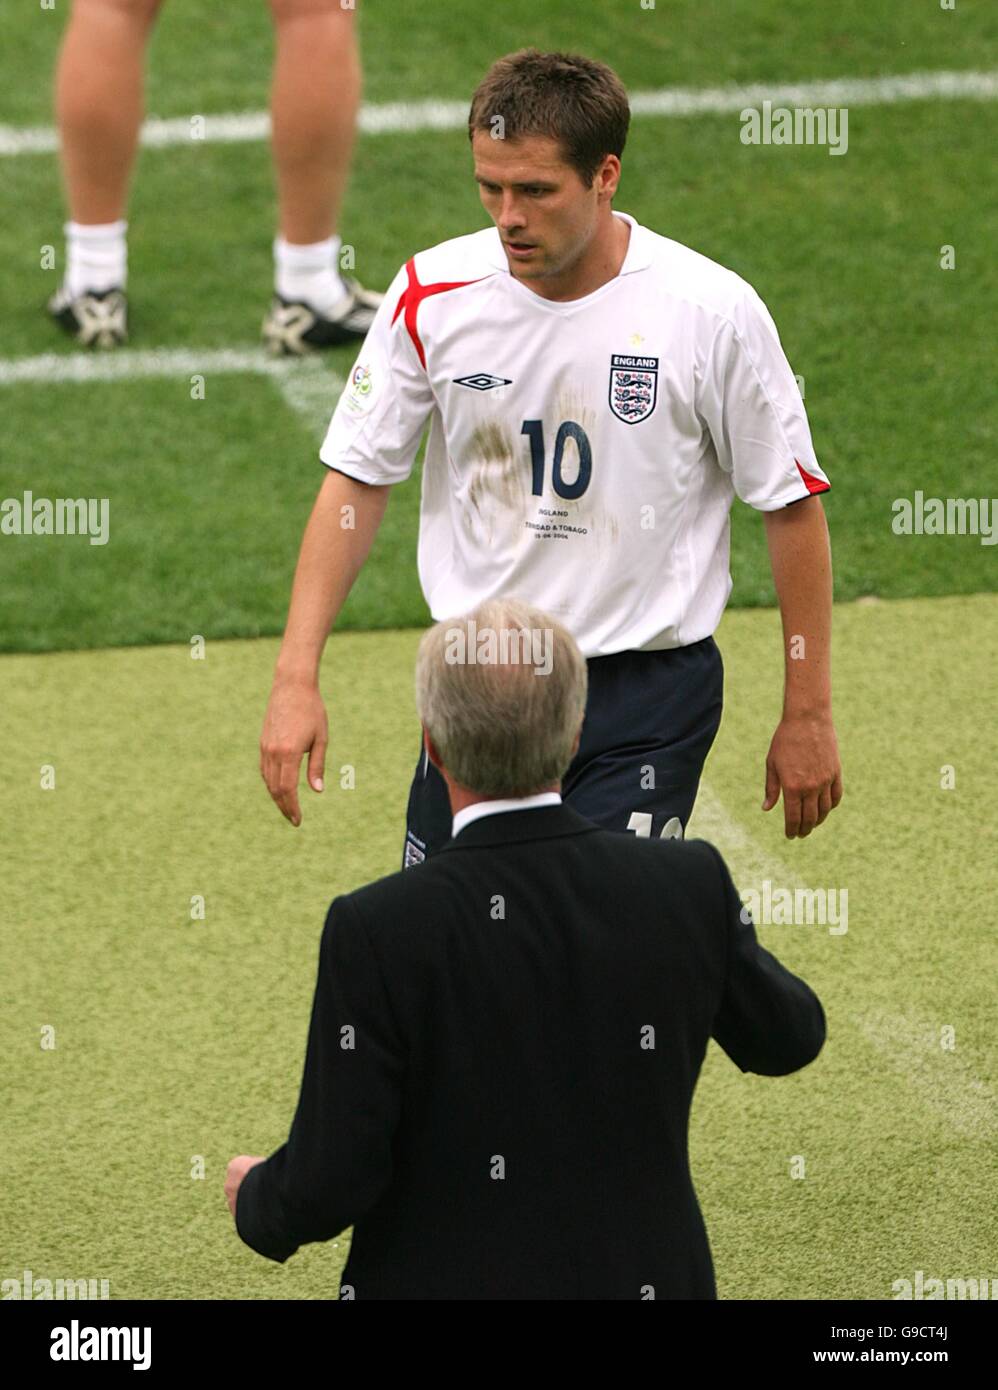 Soccer - 2006 FIFA World Cup Germany - Group B - England v Trinidad & Tobago - Franken-Stadion. England's Michael Owen walks passed England manager Sven Goran Eriksson following being substituted by Wayne Rooney Stock Photo